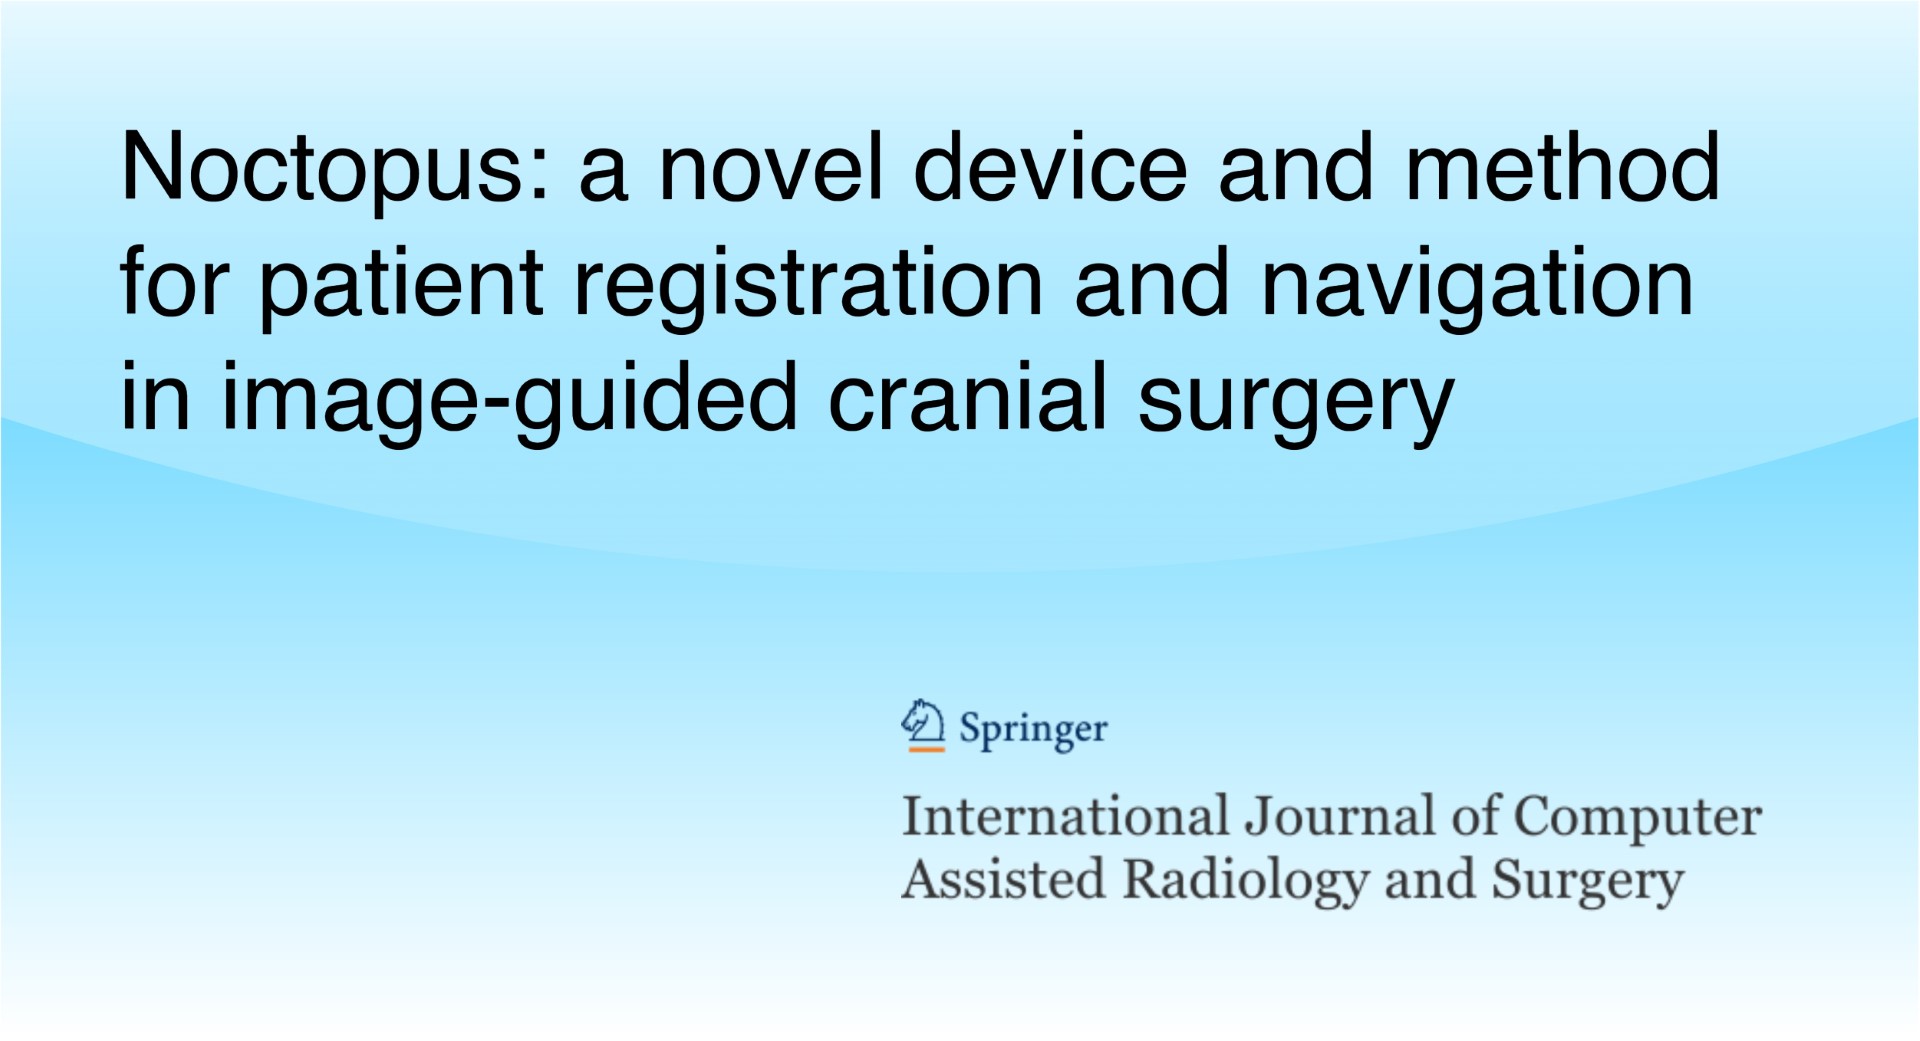 Noctopus: a novel device and method for patient registration and navigation in image-guided cranial surgery